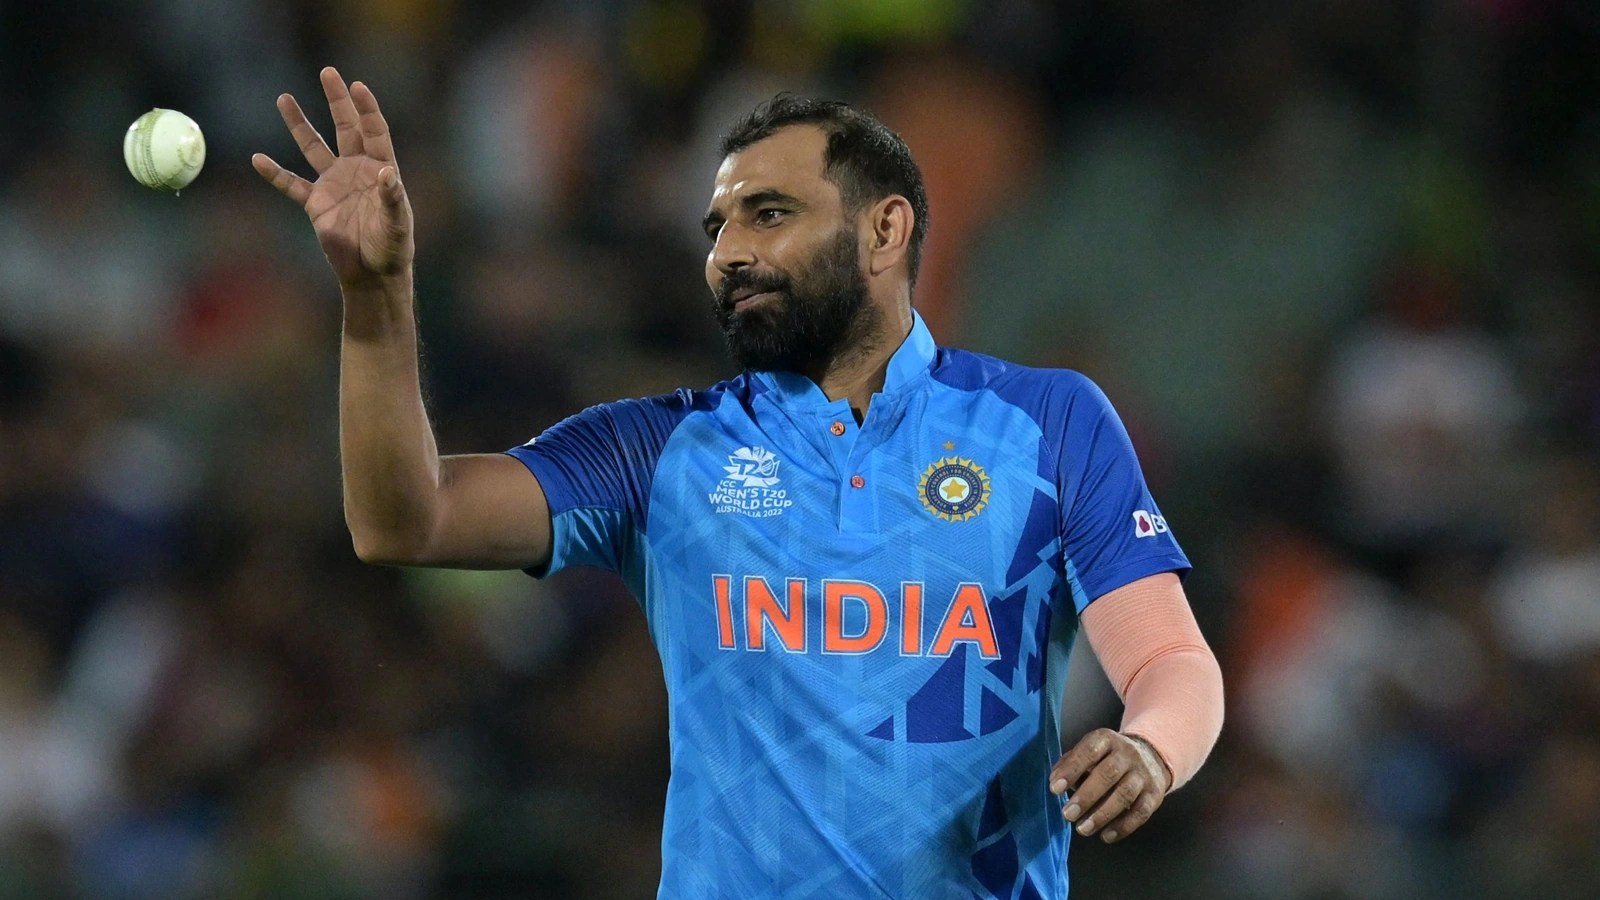 Mohammad Shami Yoga: Mohammad Shami shows off his YOGA moves, shares an  inspirational quote: Watch Video